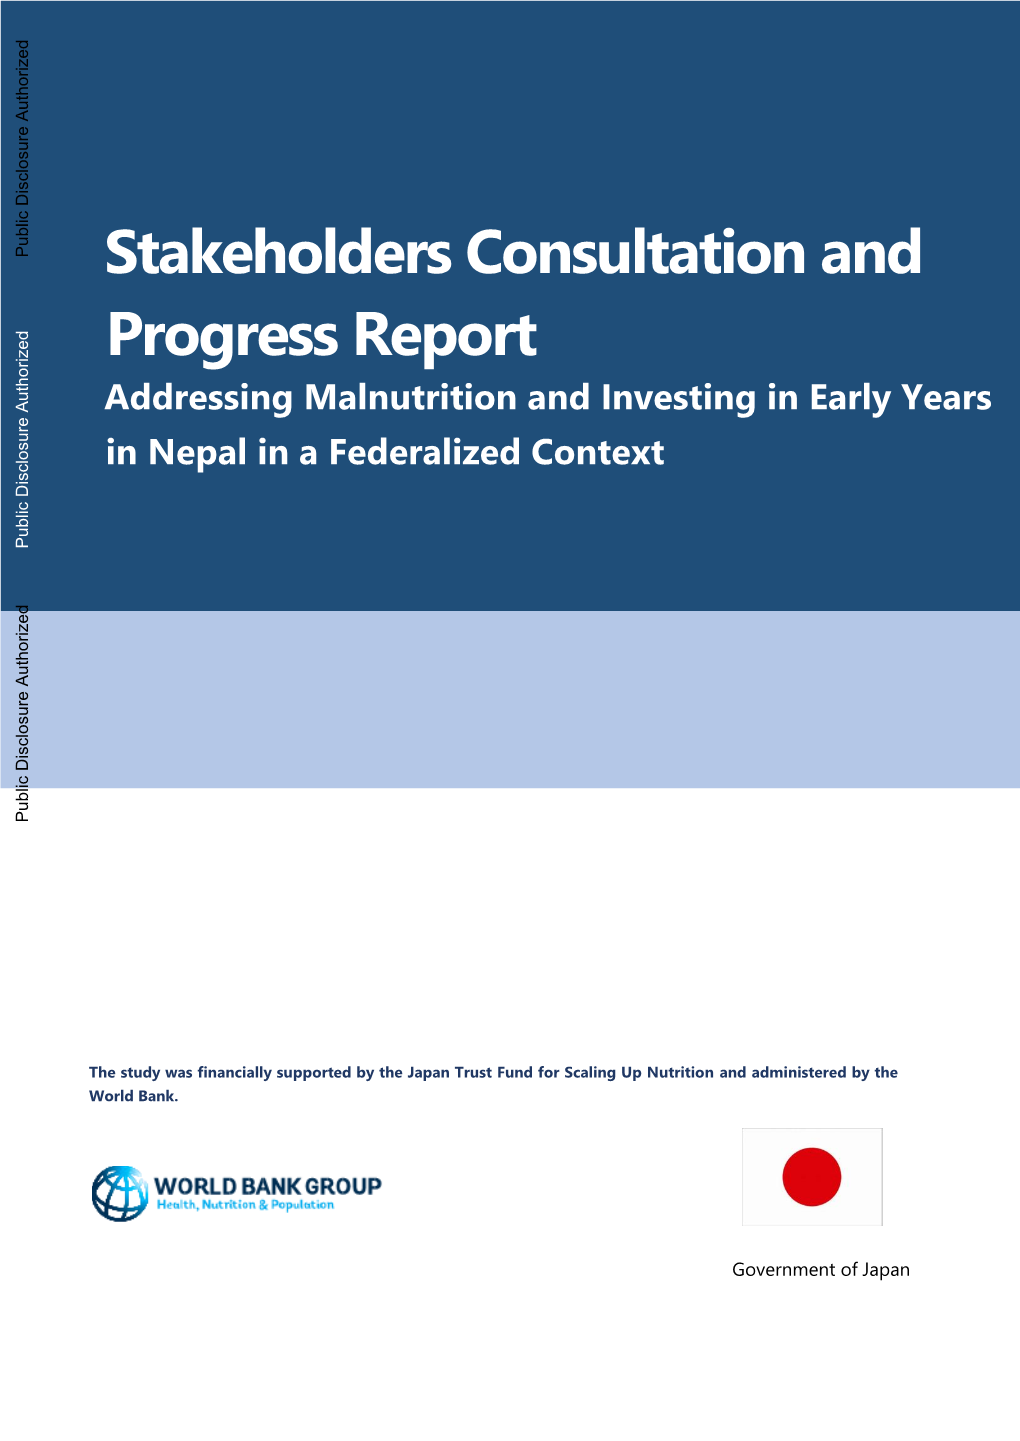 Stakeholders Consultation and Progress Report Addressing Malnutrition and Investing in Early Years in Nepal in a Federalized Context Public Disclosure Authorized